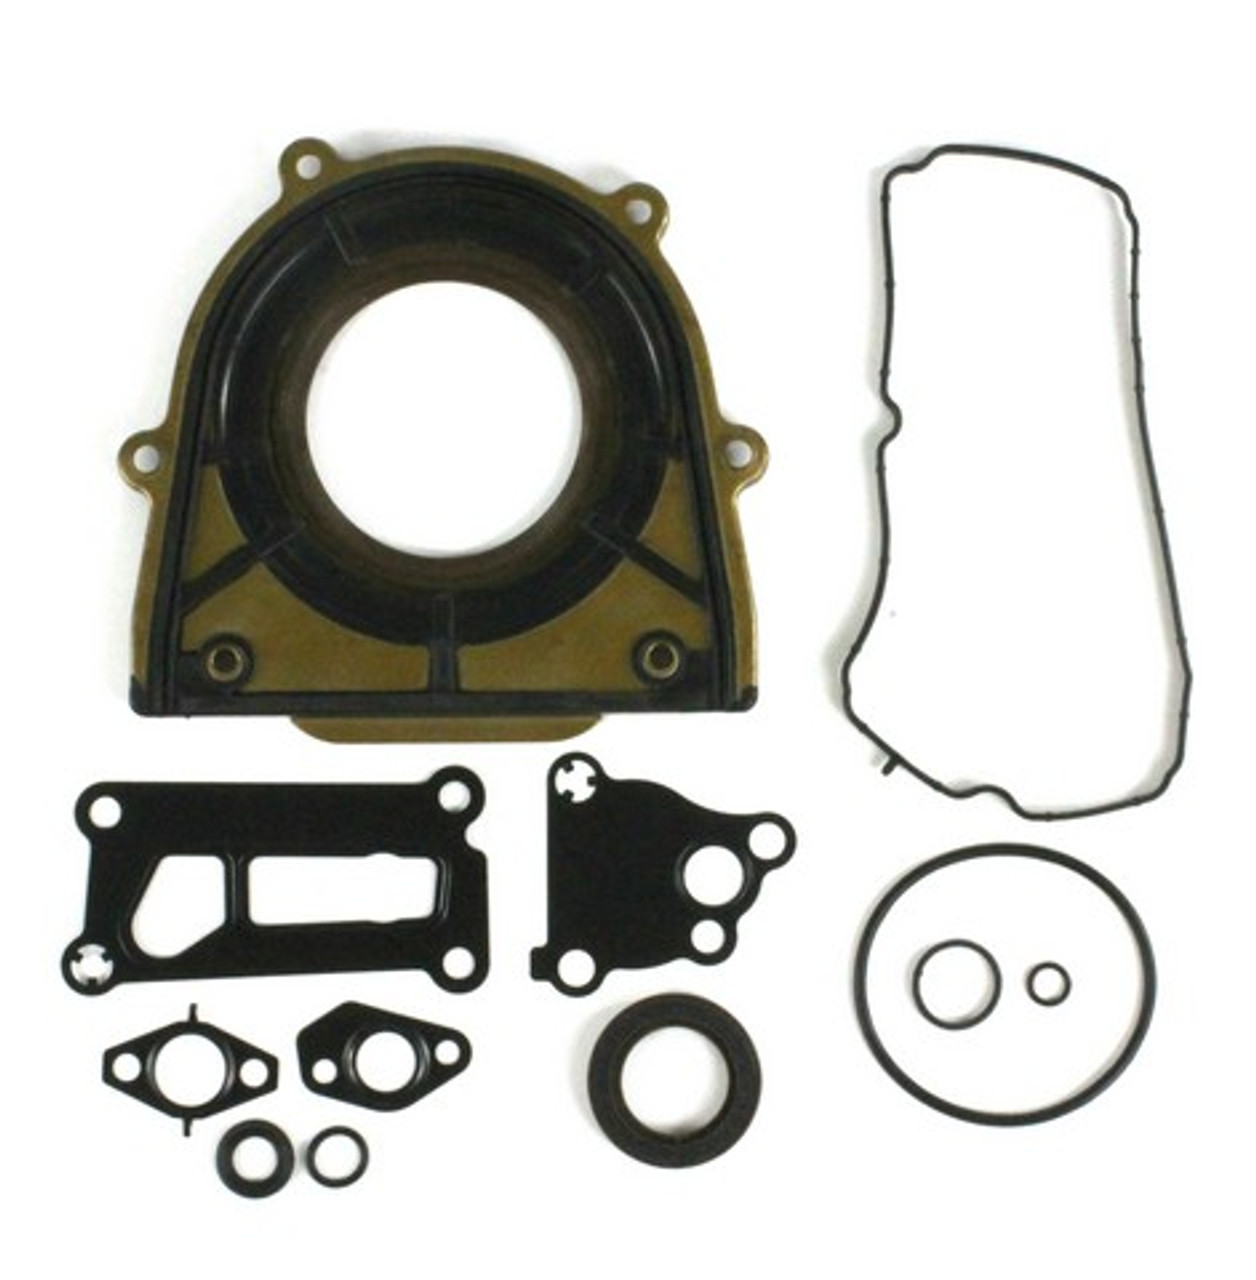 2013 Ford Transit Connect 2.0L Lower Gasket Set LGS4032.E35